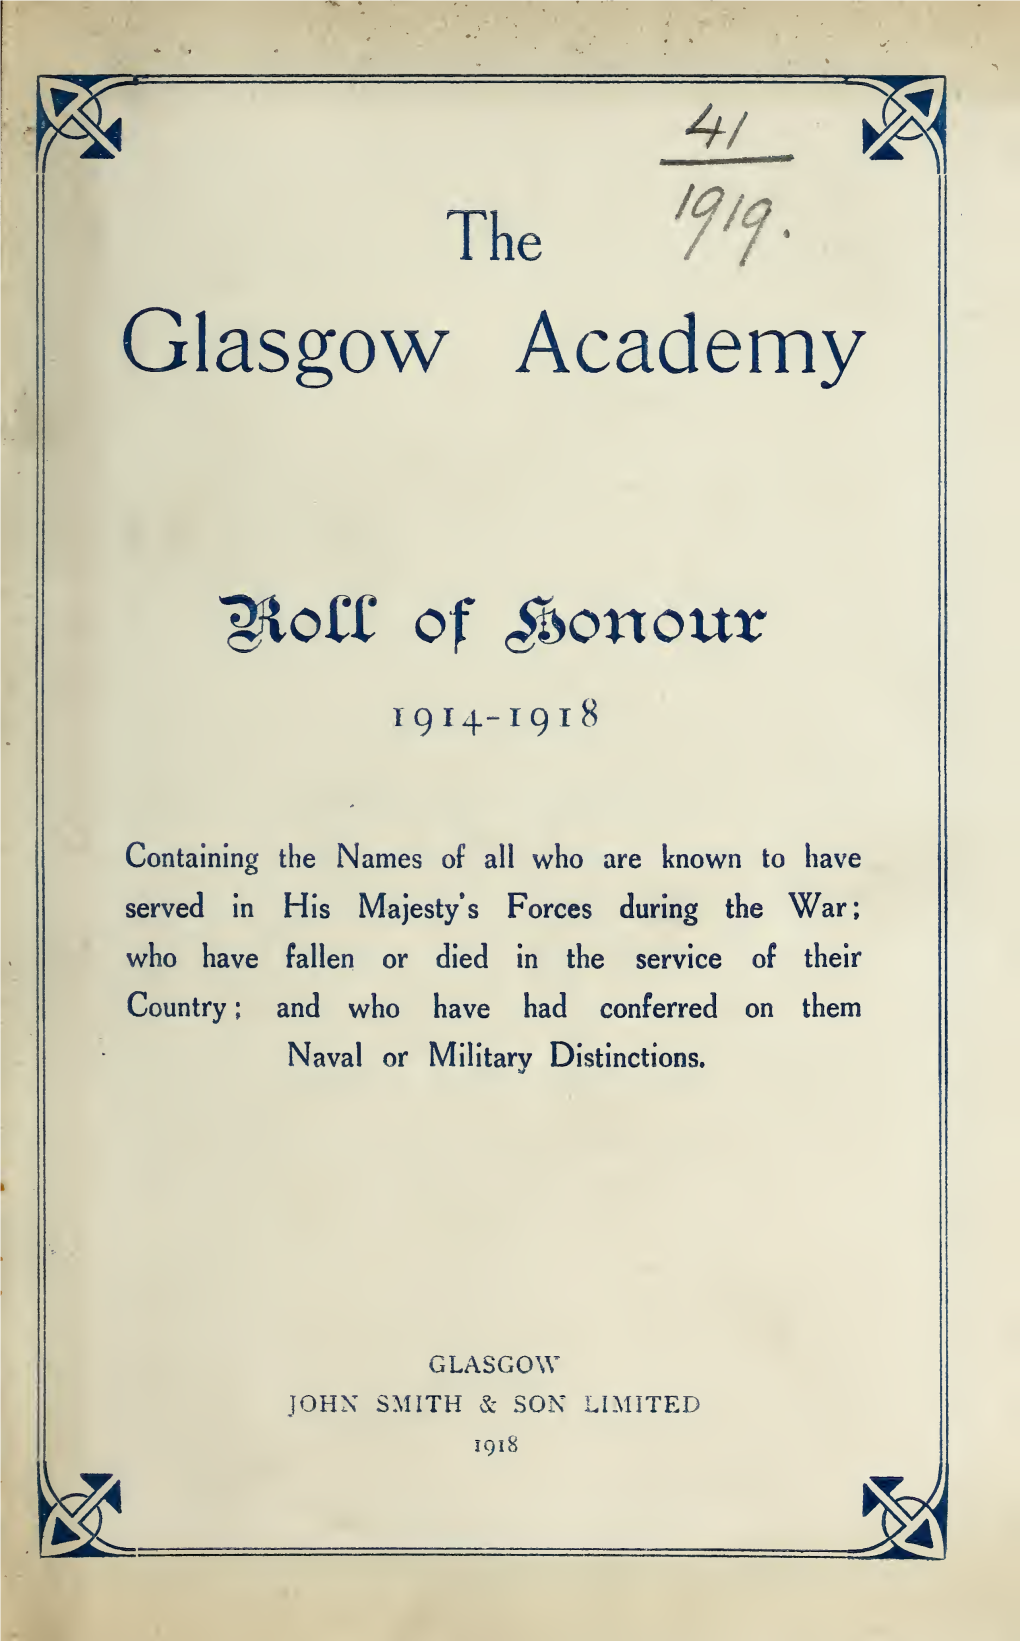 The Glasgow Academy Roll of Honour, 1914-1918